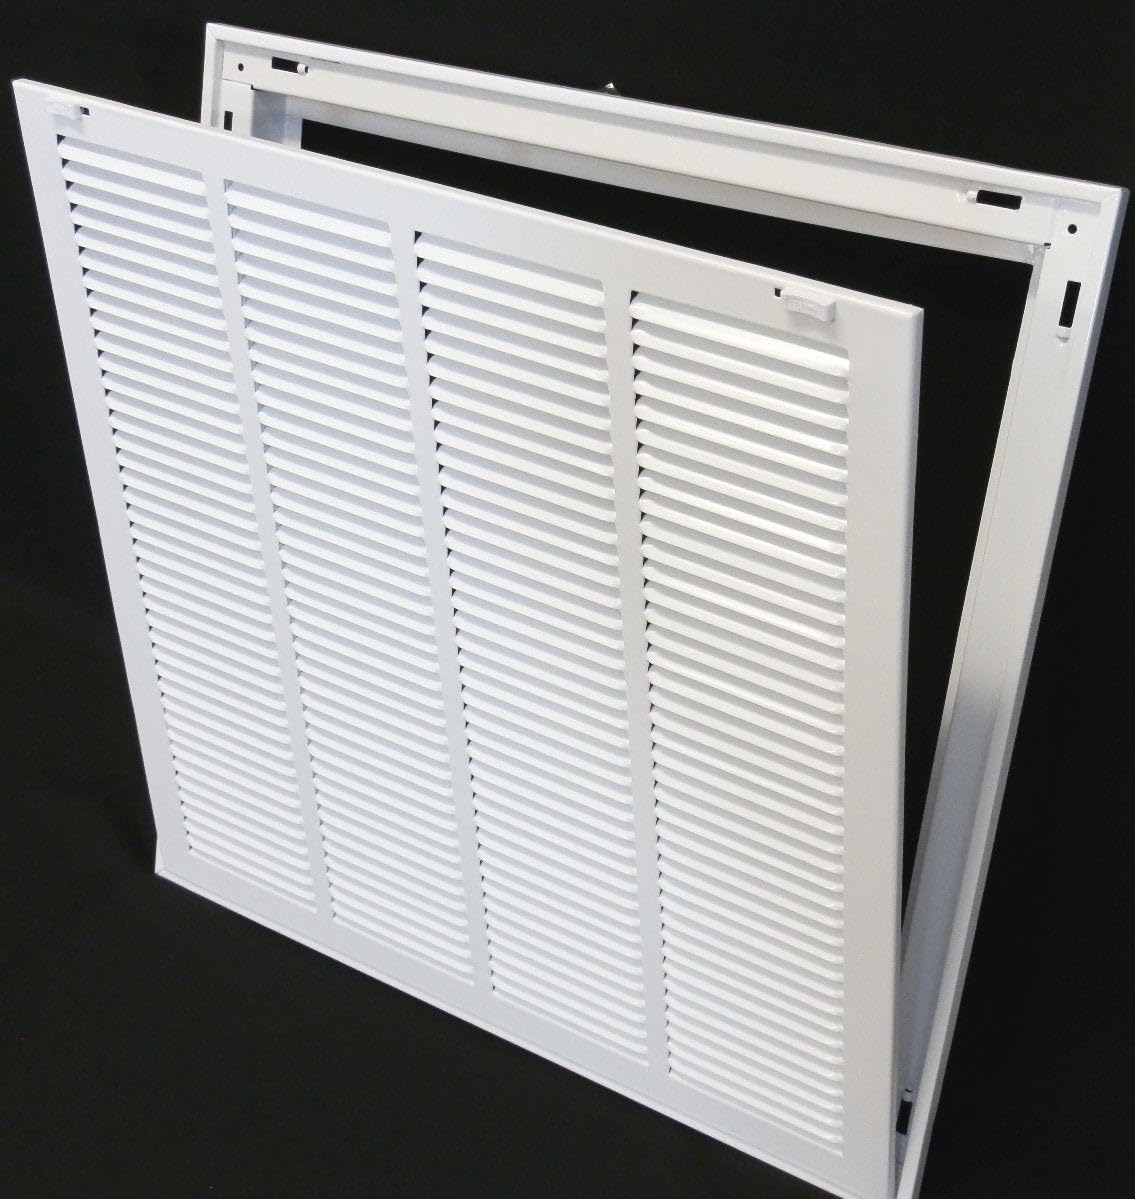 24&quot; X 20&quot; Steel Return Air Filter Grille for 1&quot; Filter - Removable Frame - [Outer Dimensions: 26 5/8&quot; X 22 5/8&quot;]